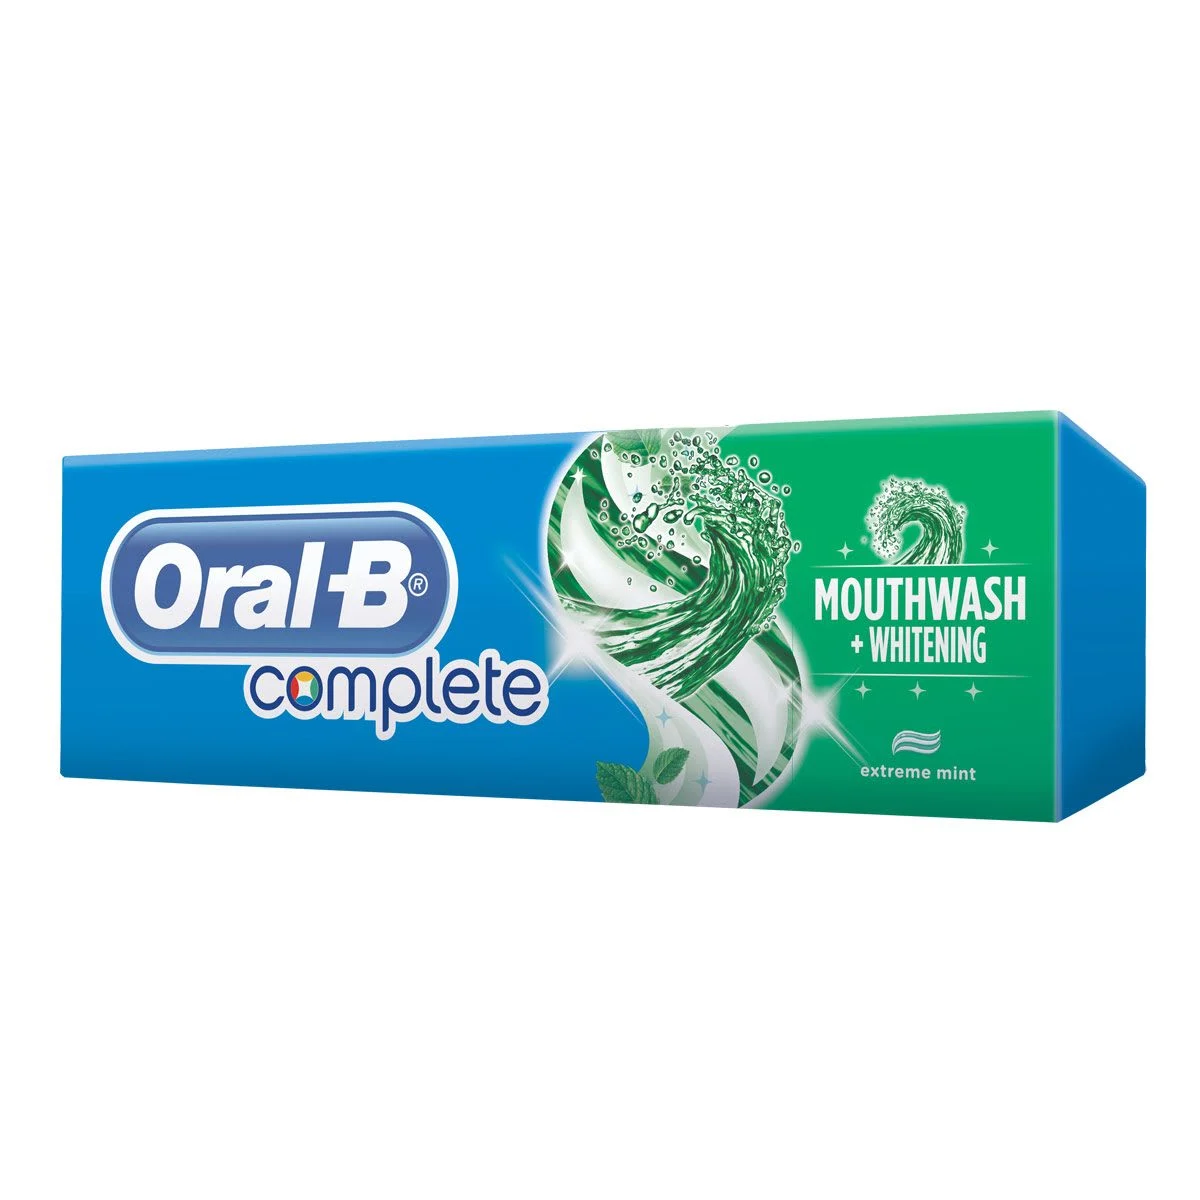 Oral-B Complete Mouthwash & Whitening toothpaste 